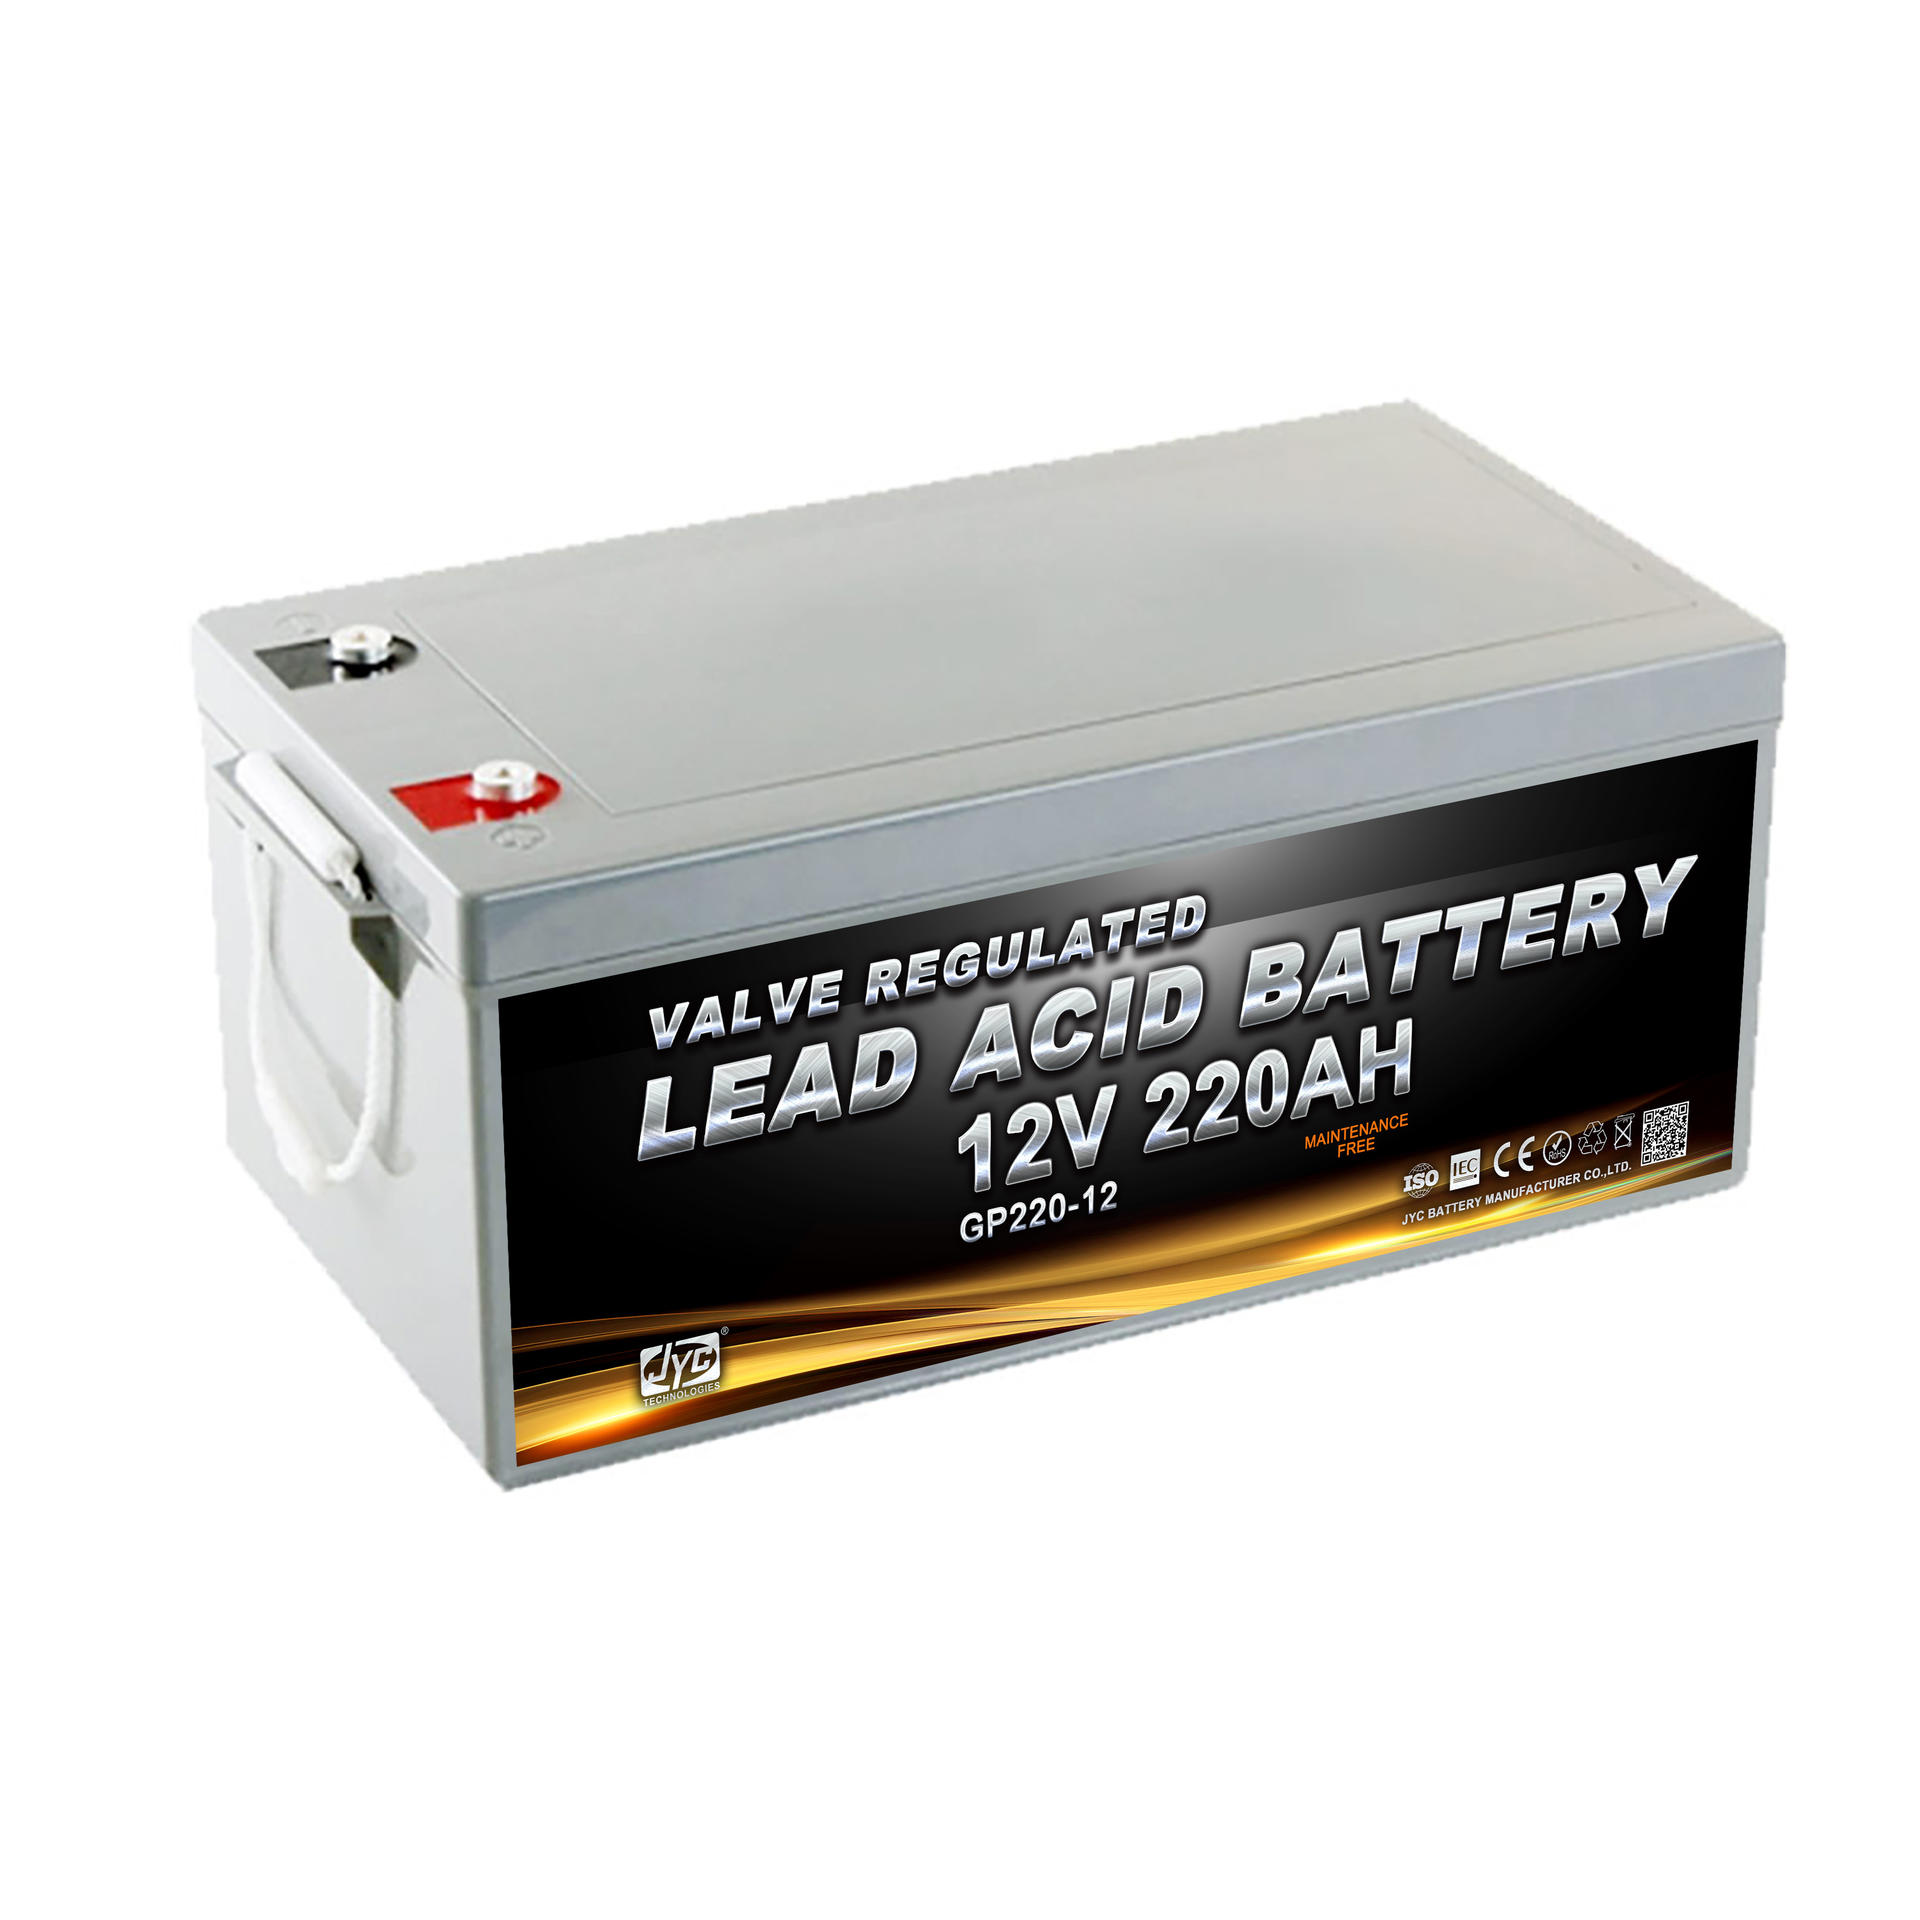 12V 250Ah Maintenance-Free Msds Sealed Lead Acid Solar Battery With High Capacity